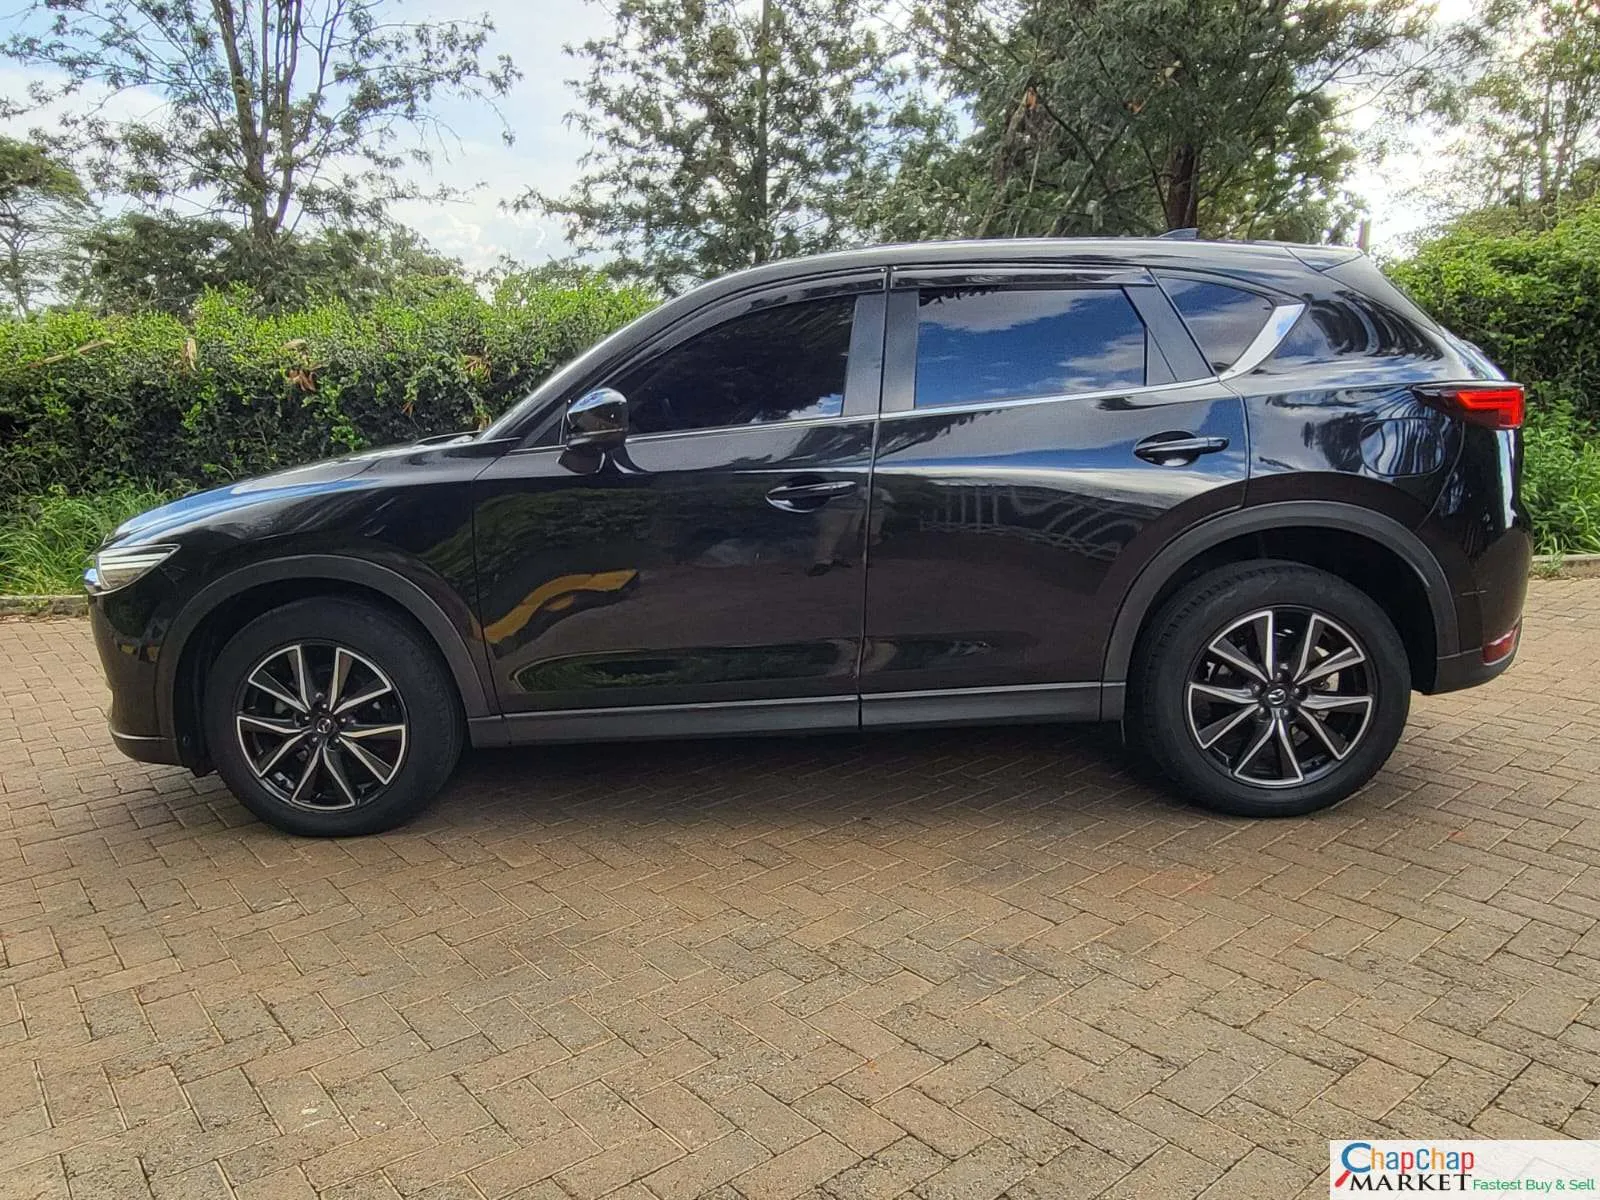 Mazda CX5 for sale in kenya hire purchase installments You Pay 30% DEPOSIT TRADE IN OK EXCLUSIVE Mazda cx5 Kenya petrol 2017